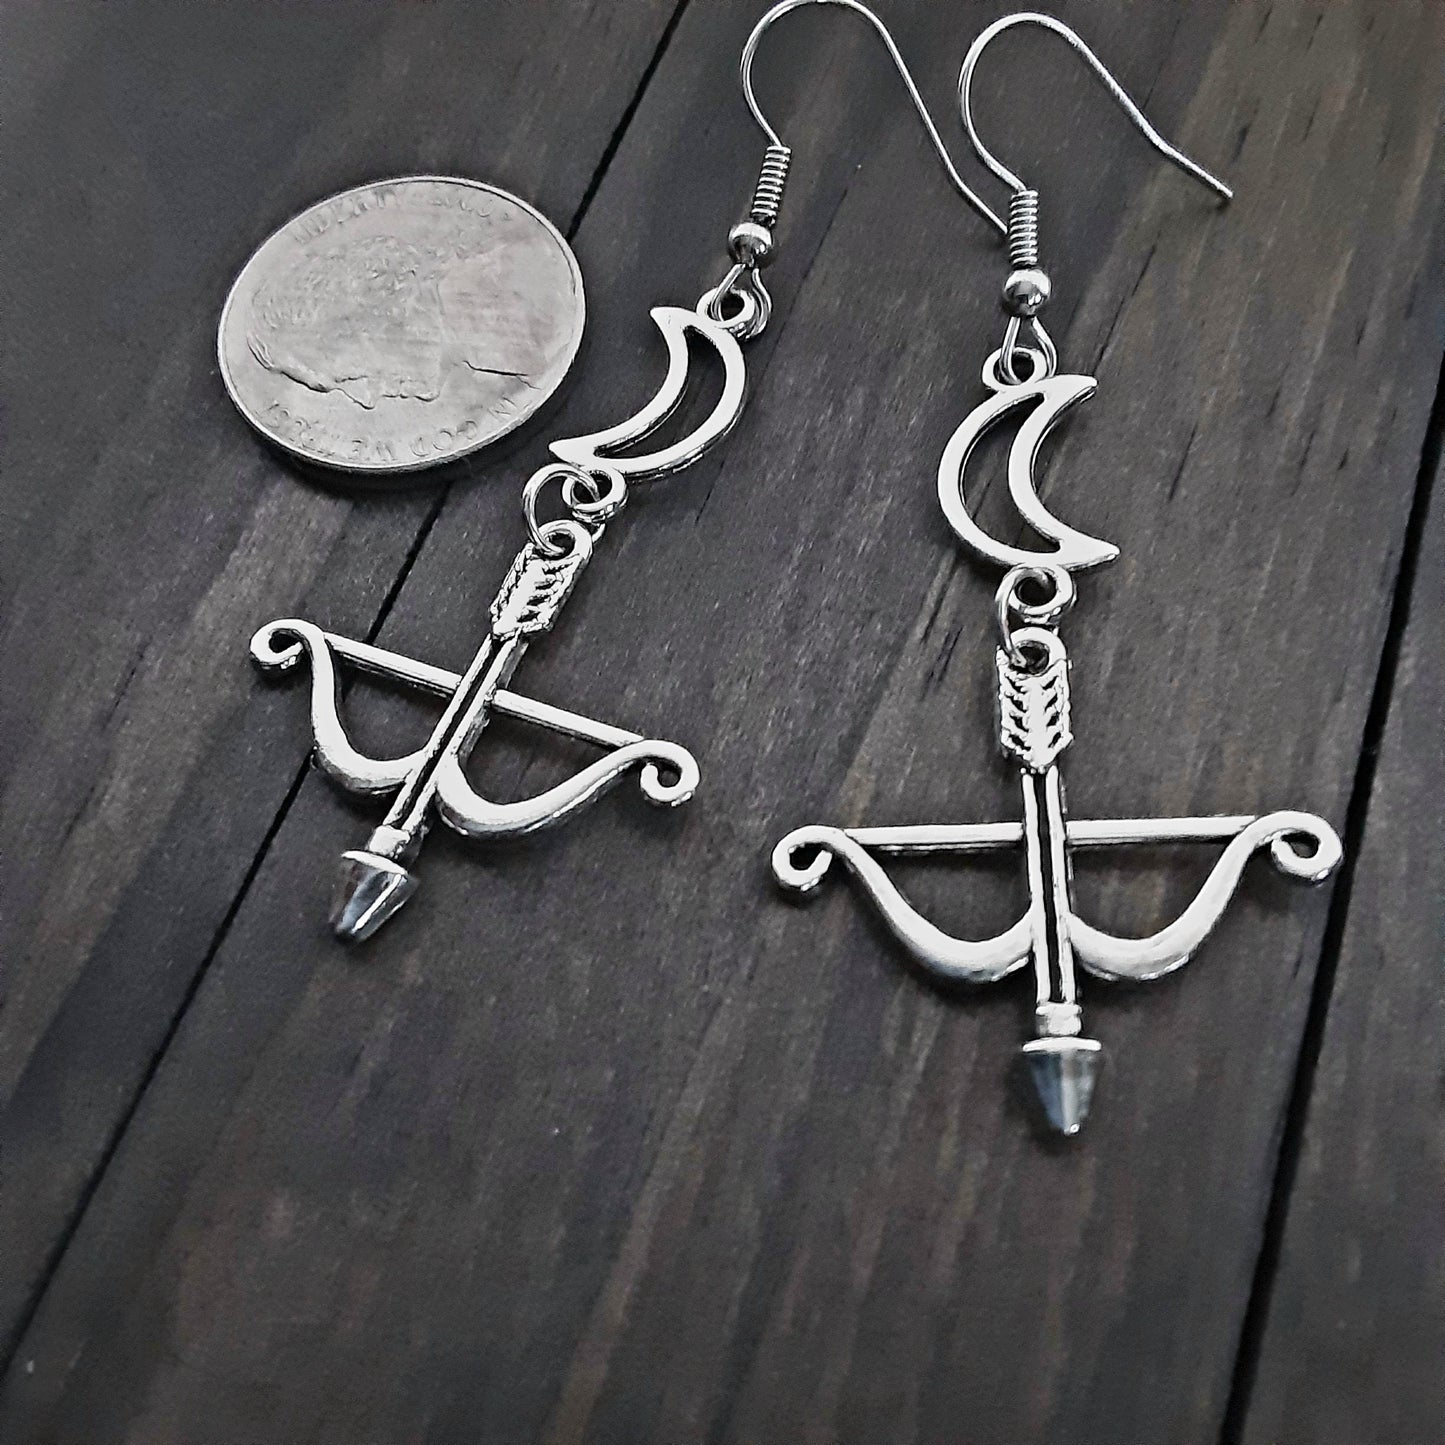 Artemis earrings Greek Goddess of the Hunt Bow and arrow with crescent moon charms Sagittarius jewelry Pagan Dedication Gift Idea